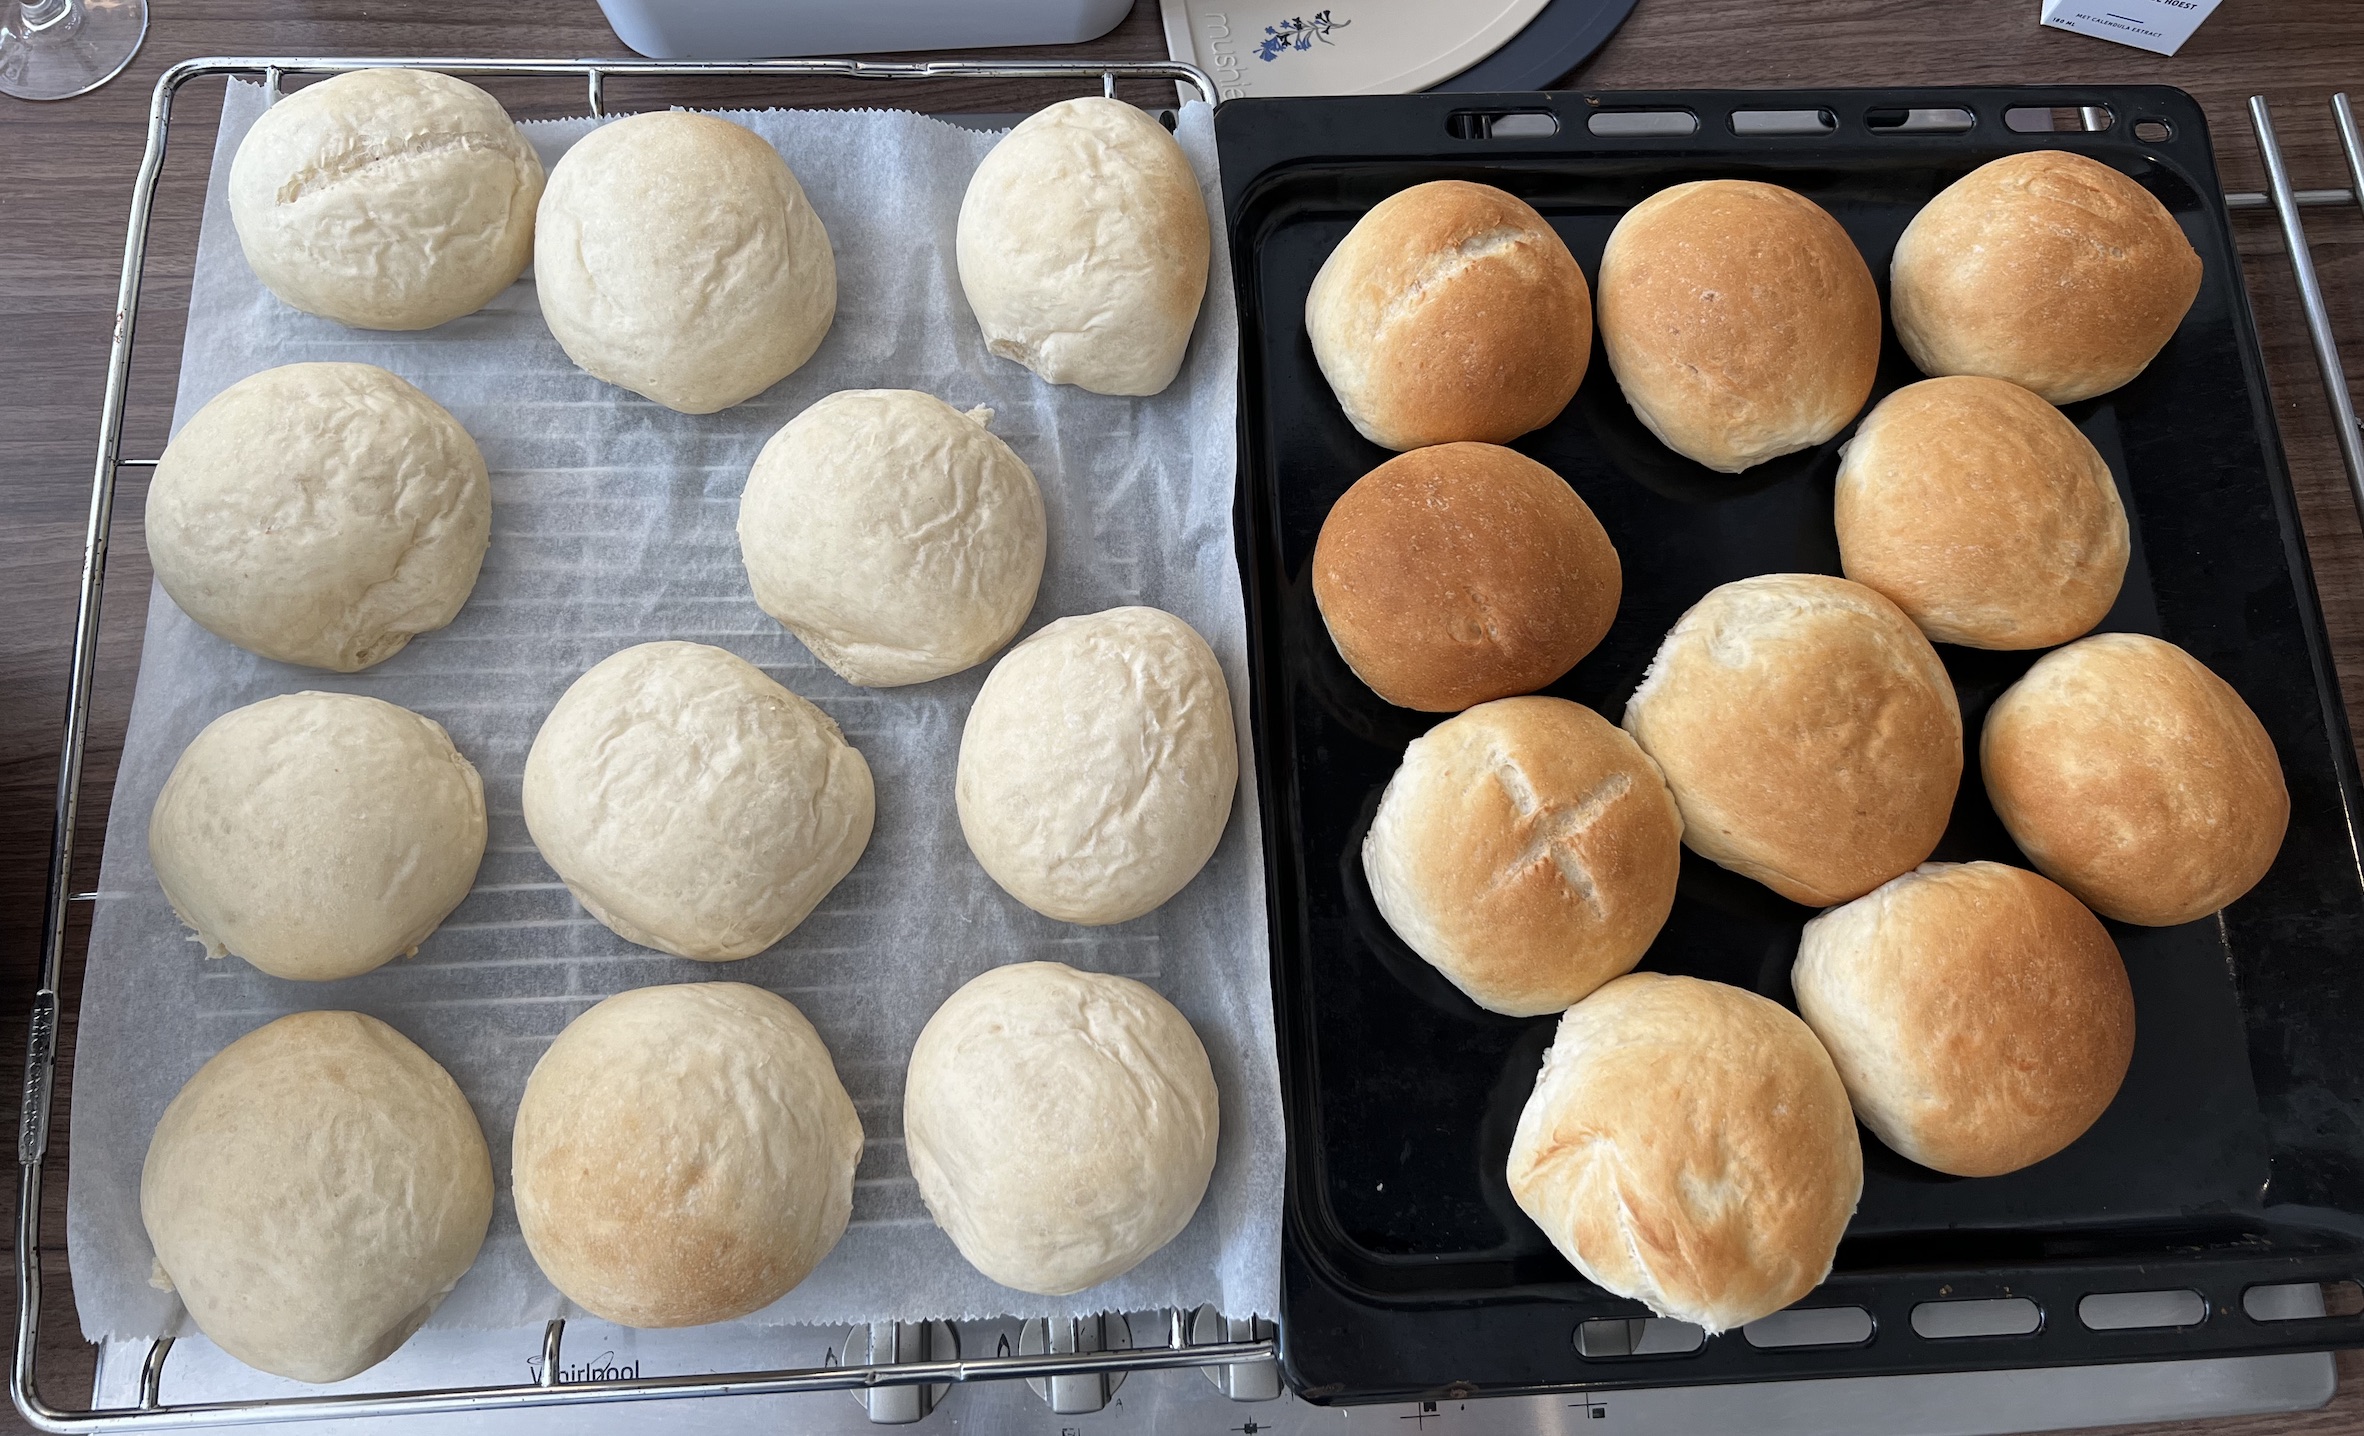 The first time my bread rolls came out this well I was very happy!